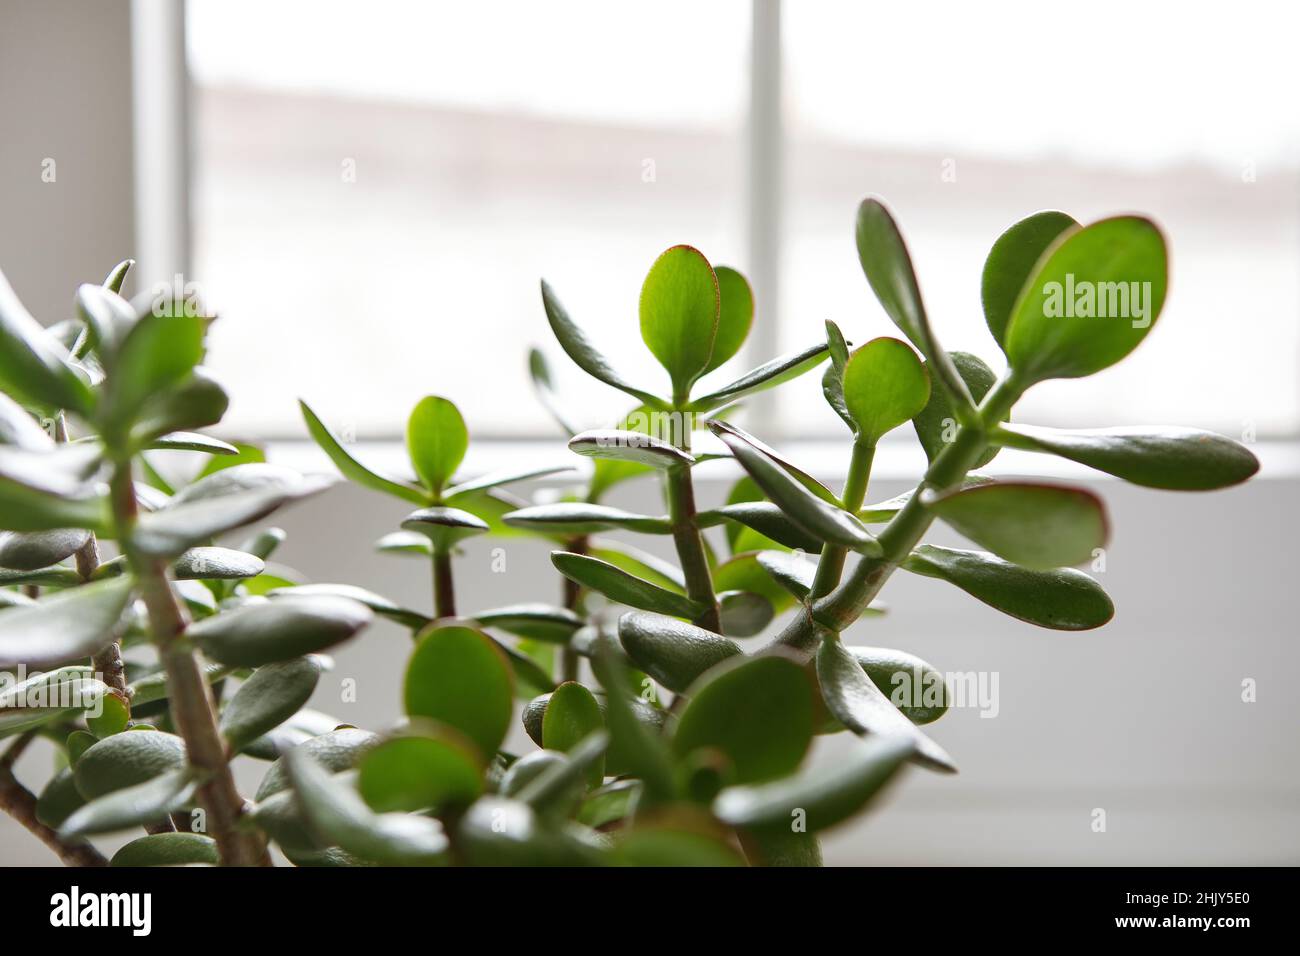 Crassula ovata, jade plant by the window close-up. House plant in pot on window sill. View on lush green leaves. Succulent in home garden. Stock Photo